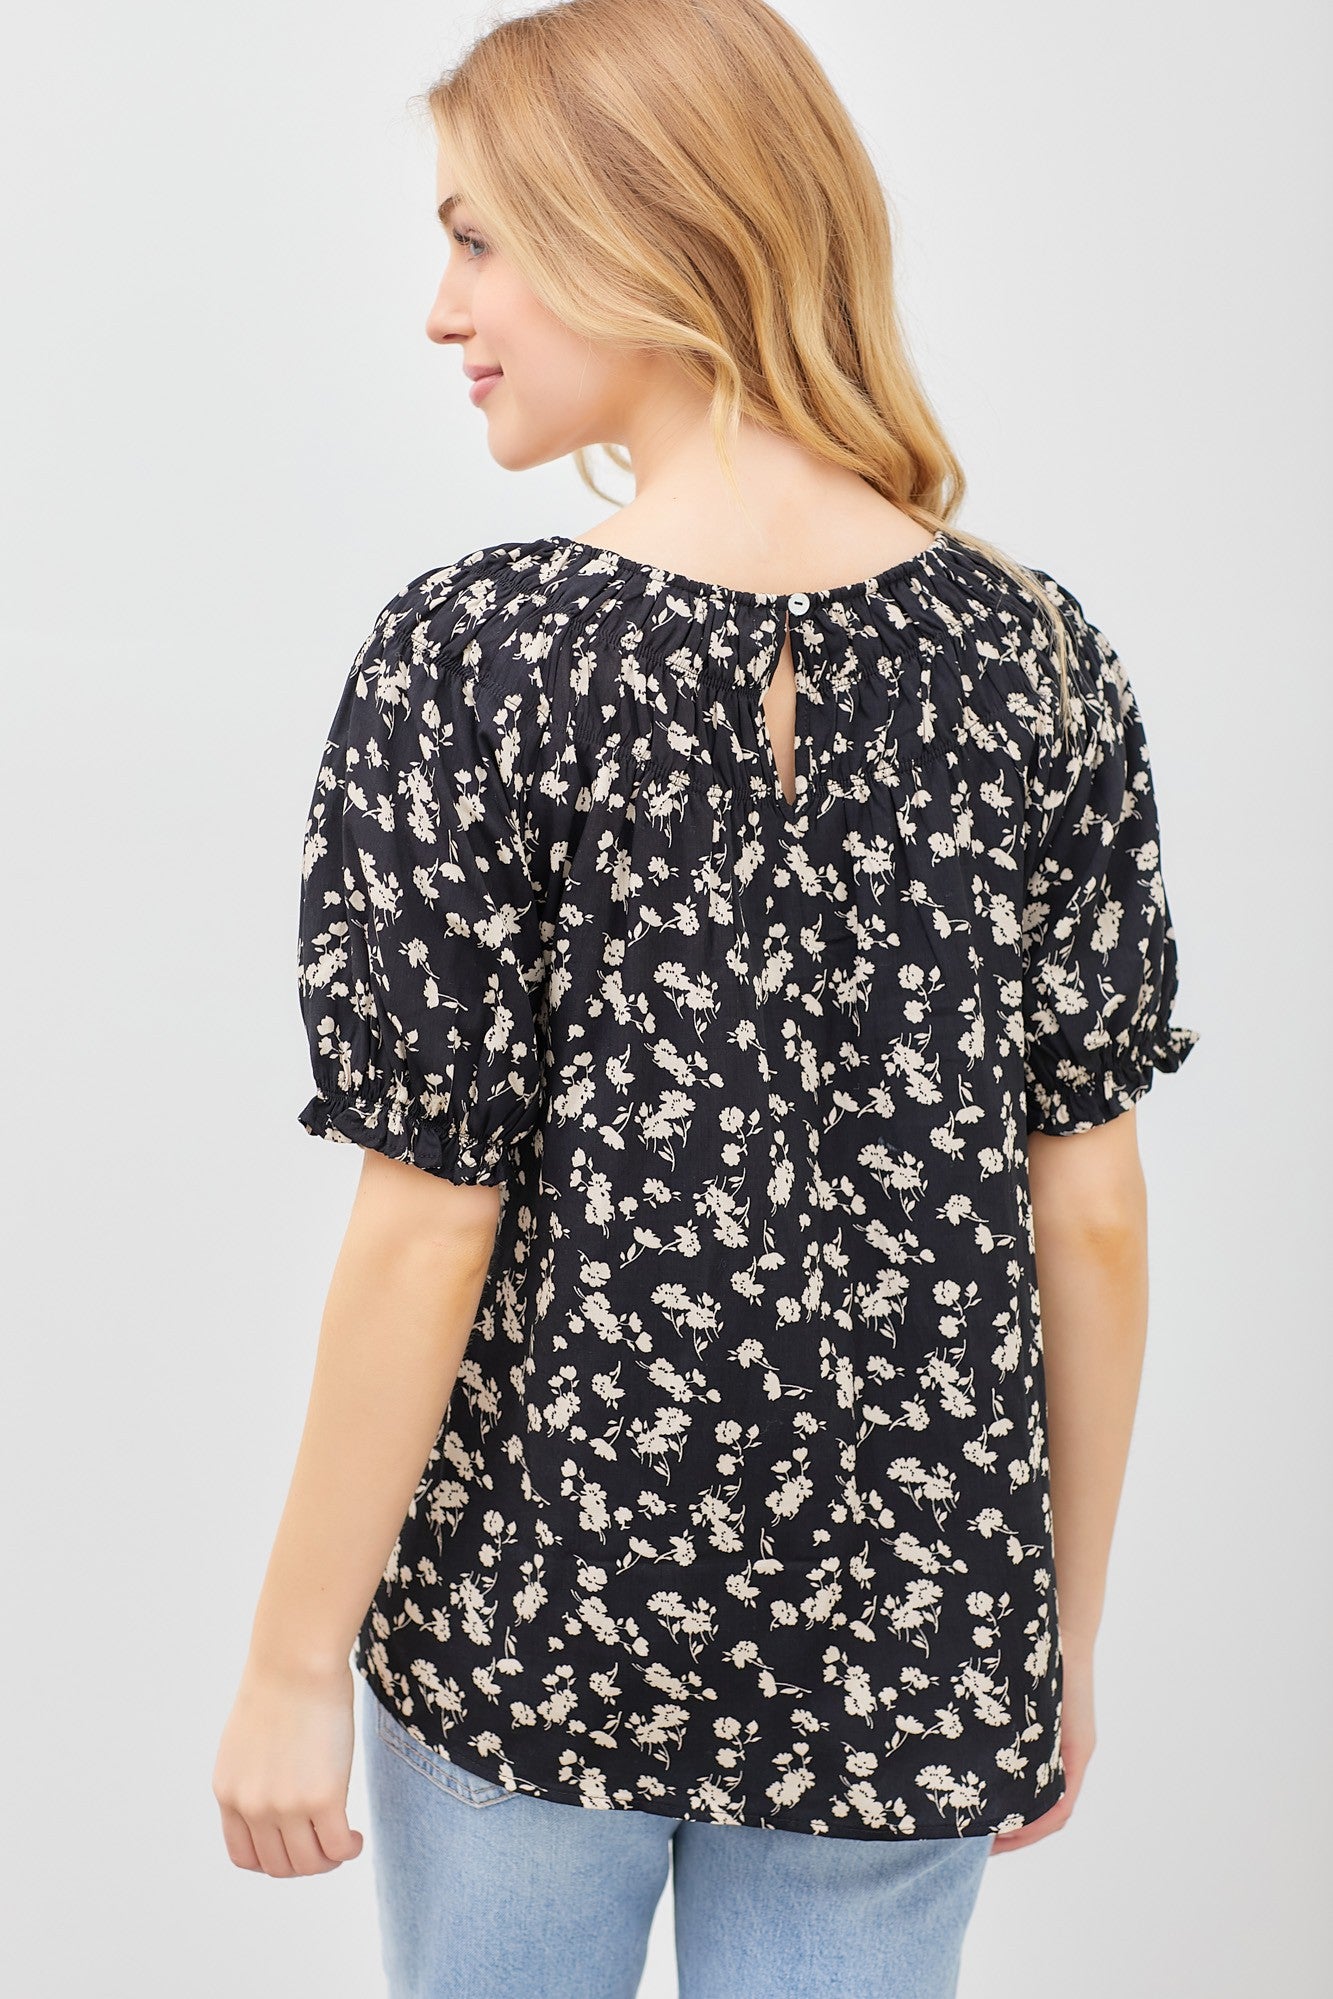 Go With The Flow Blouse - CURVY